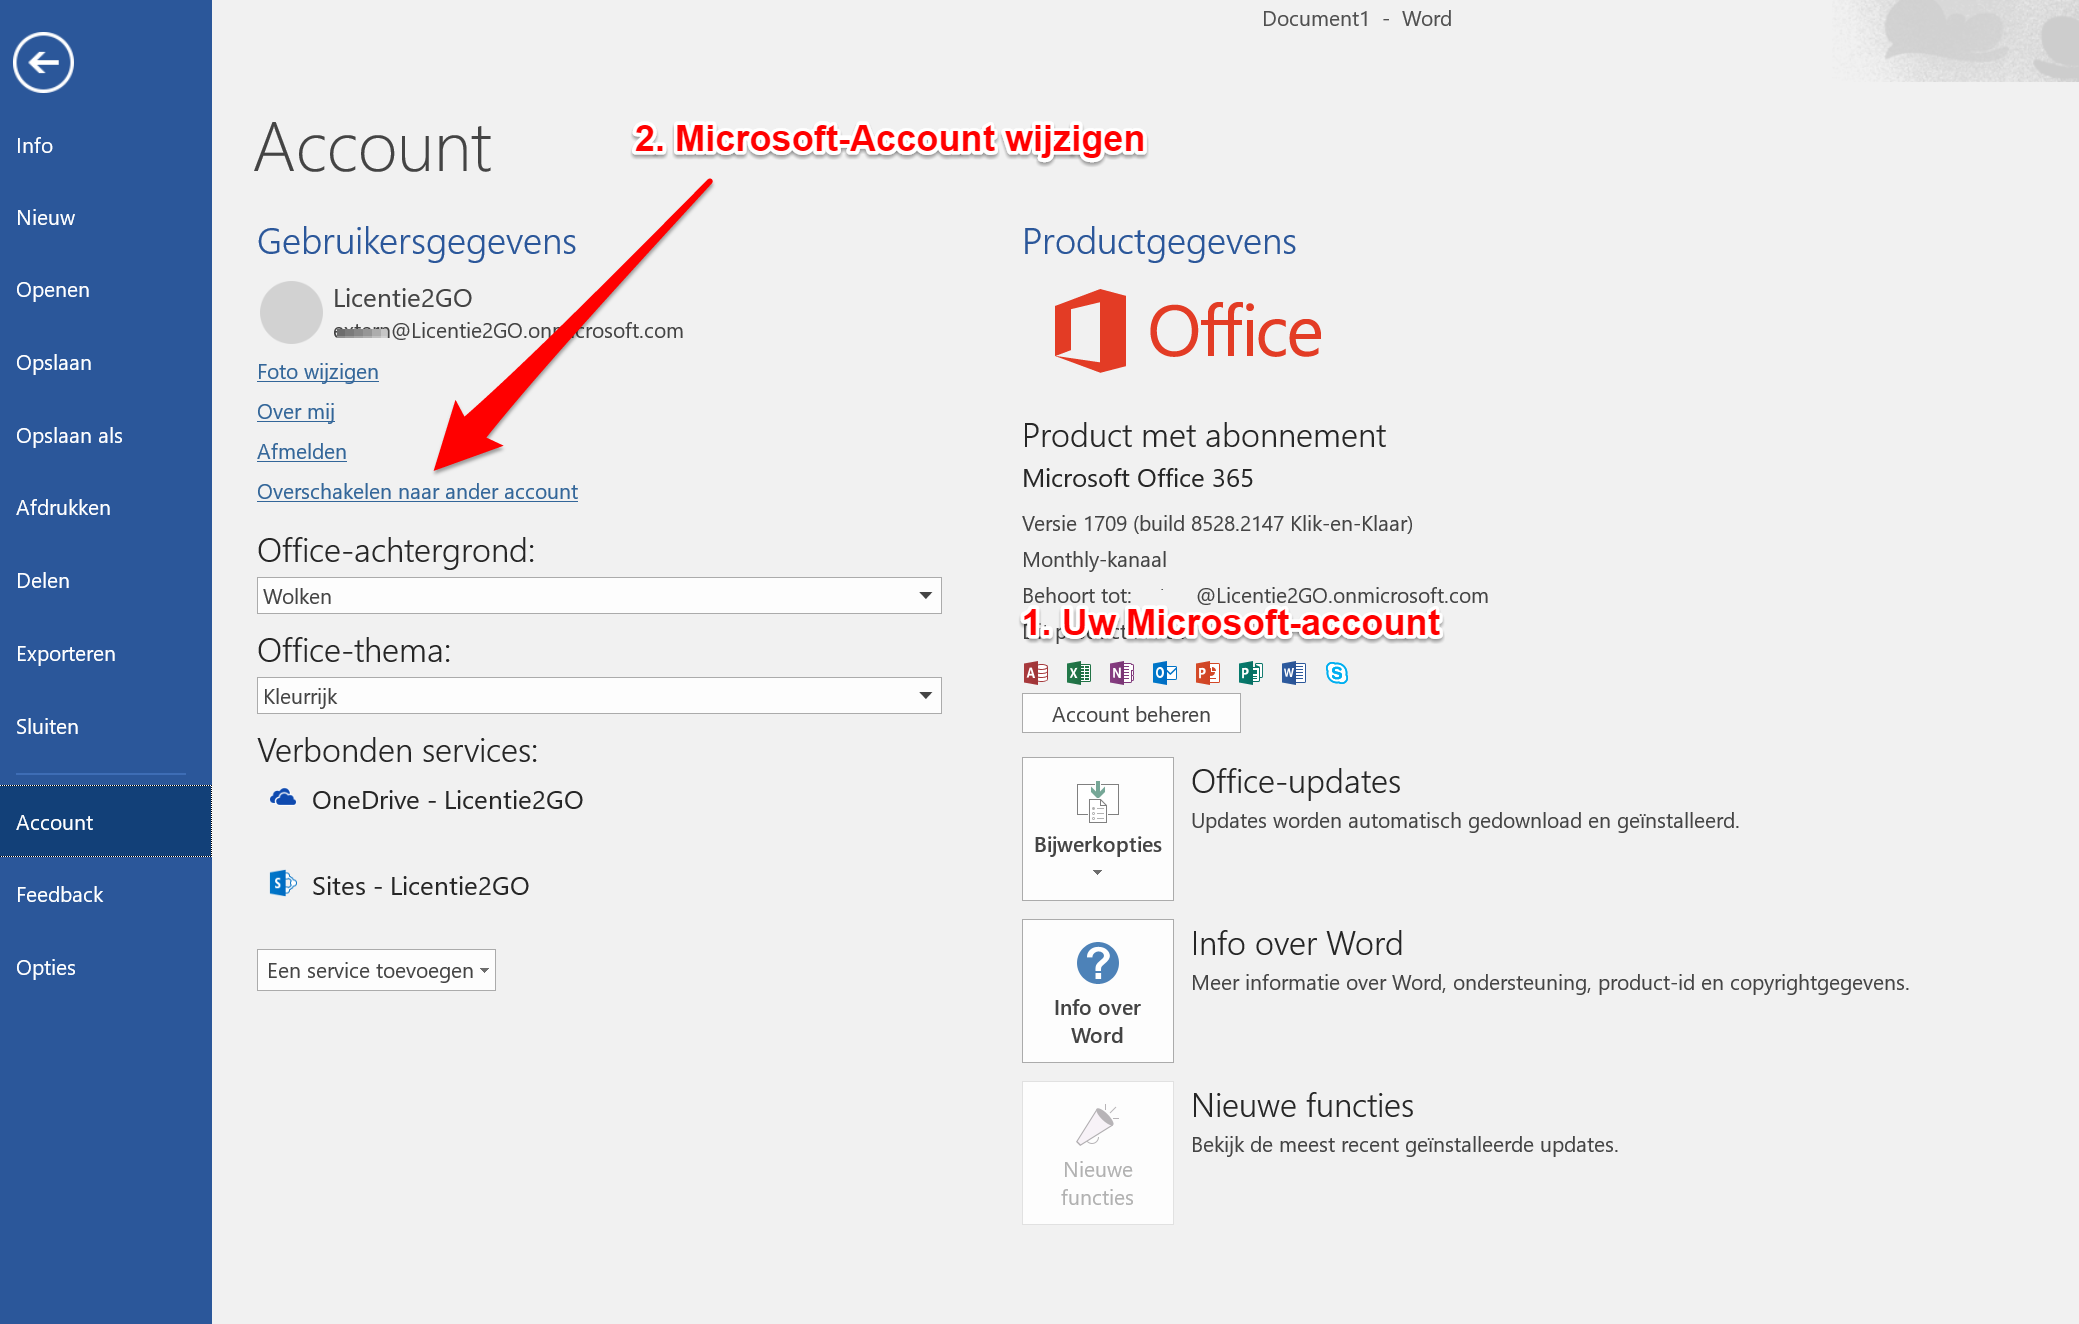 change email and phone number linked to microsoft account